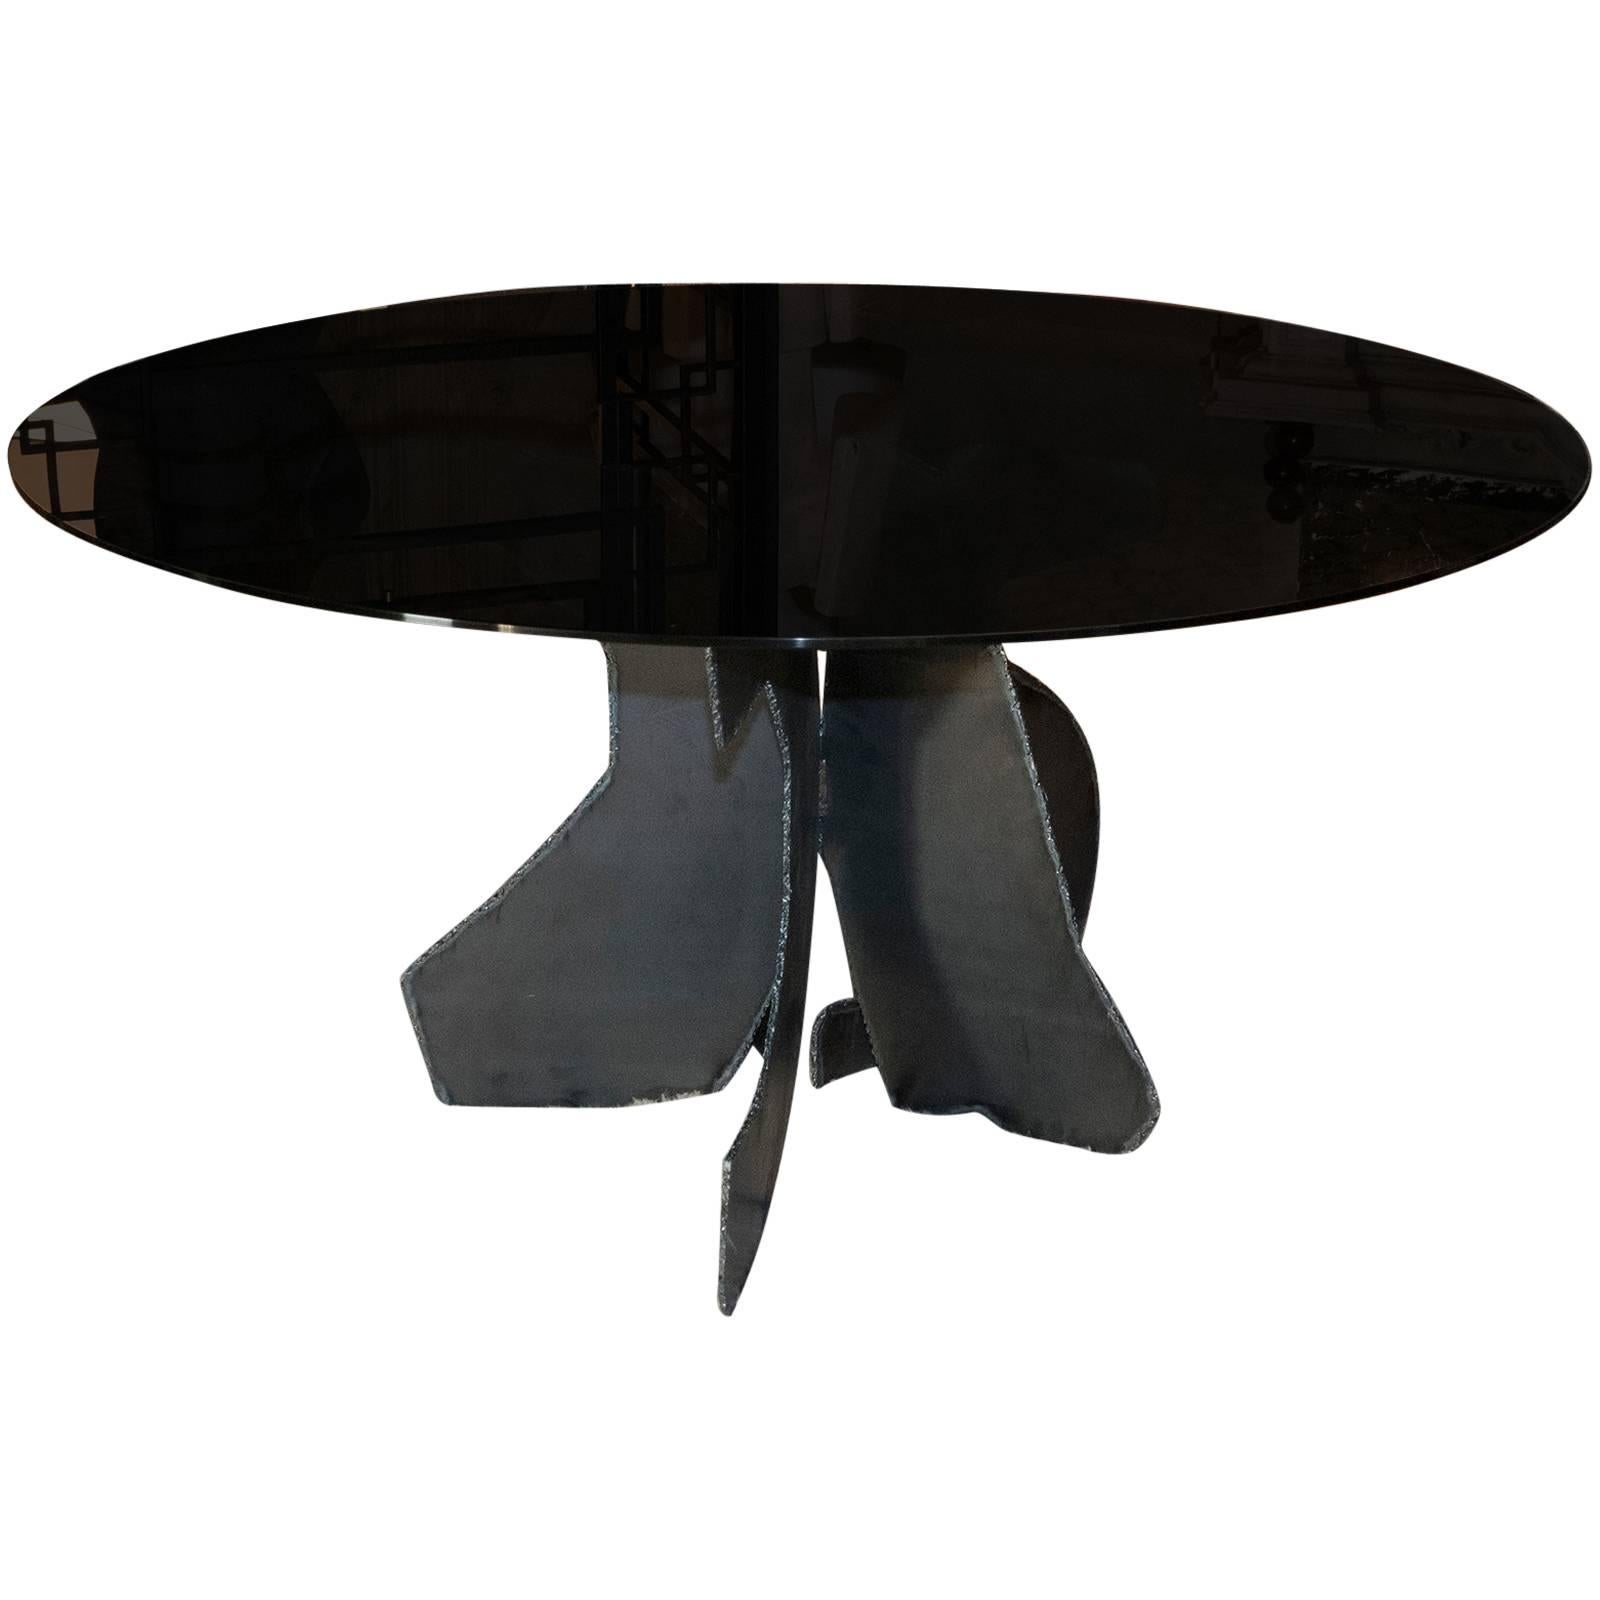 Flair Edition Sculptural Brutalist Steel Dining Table